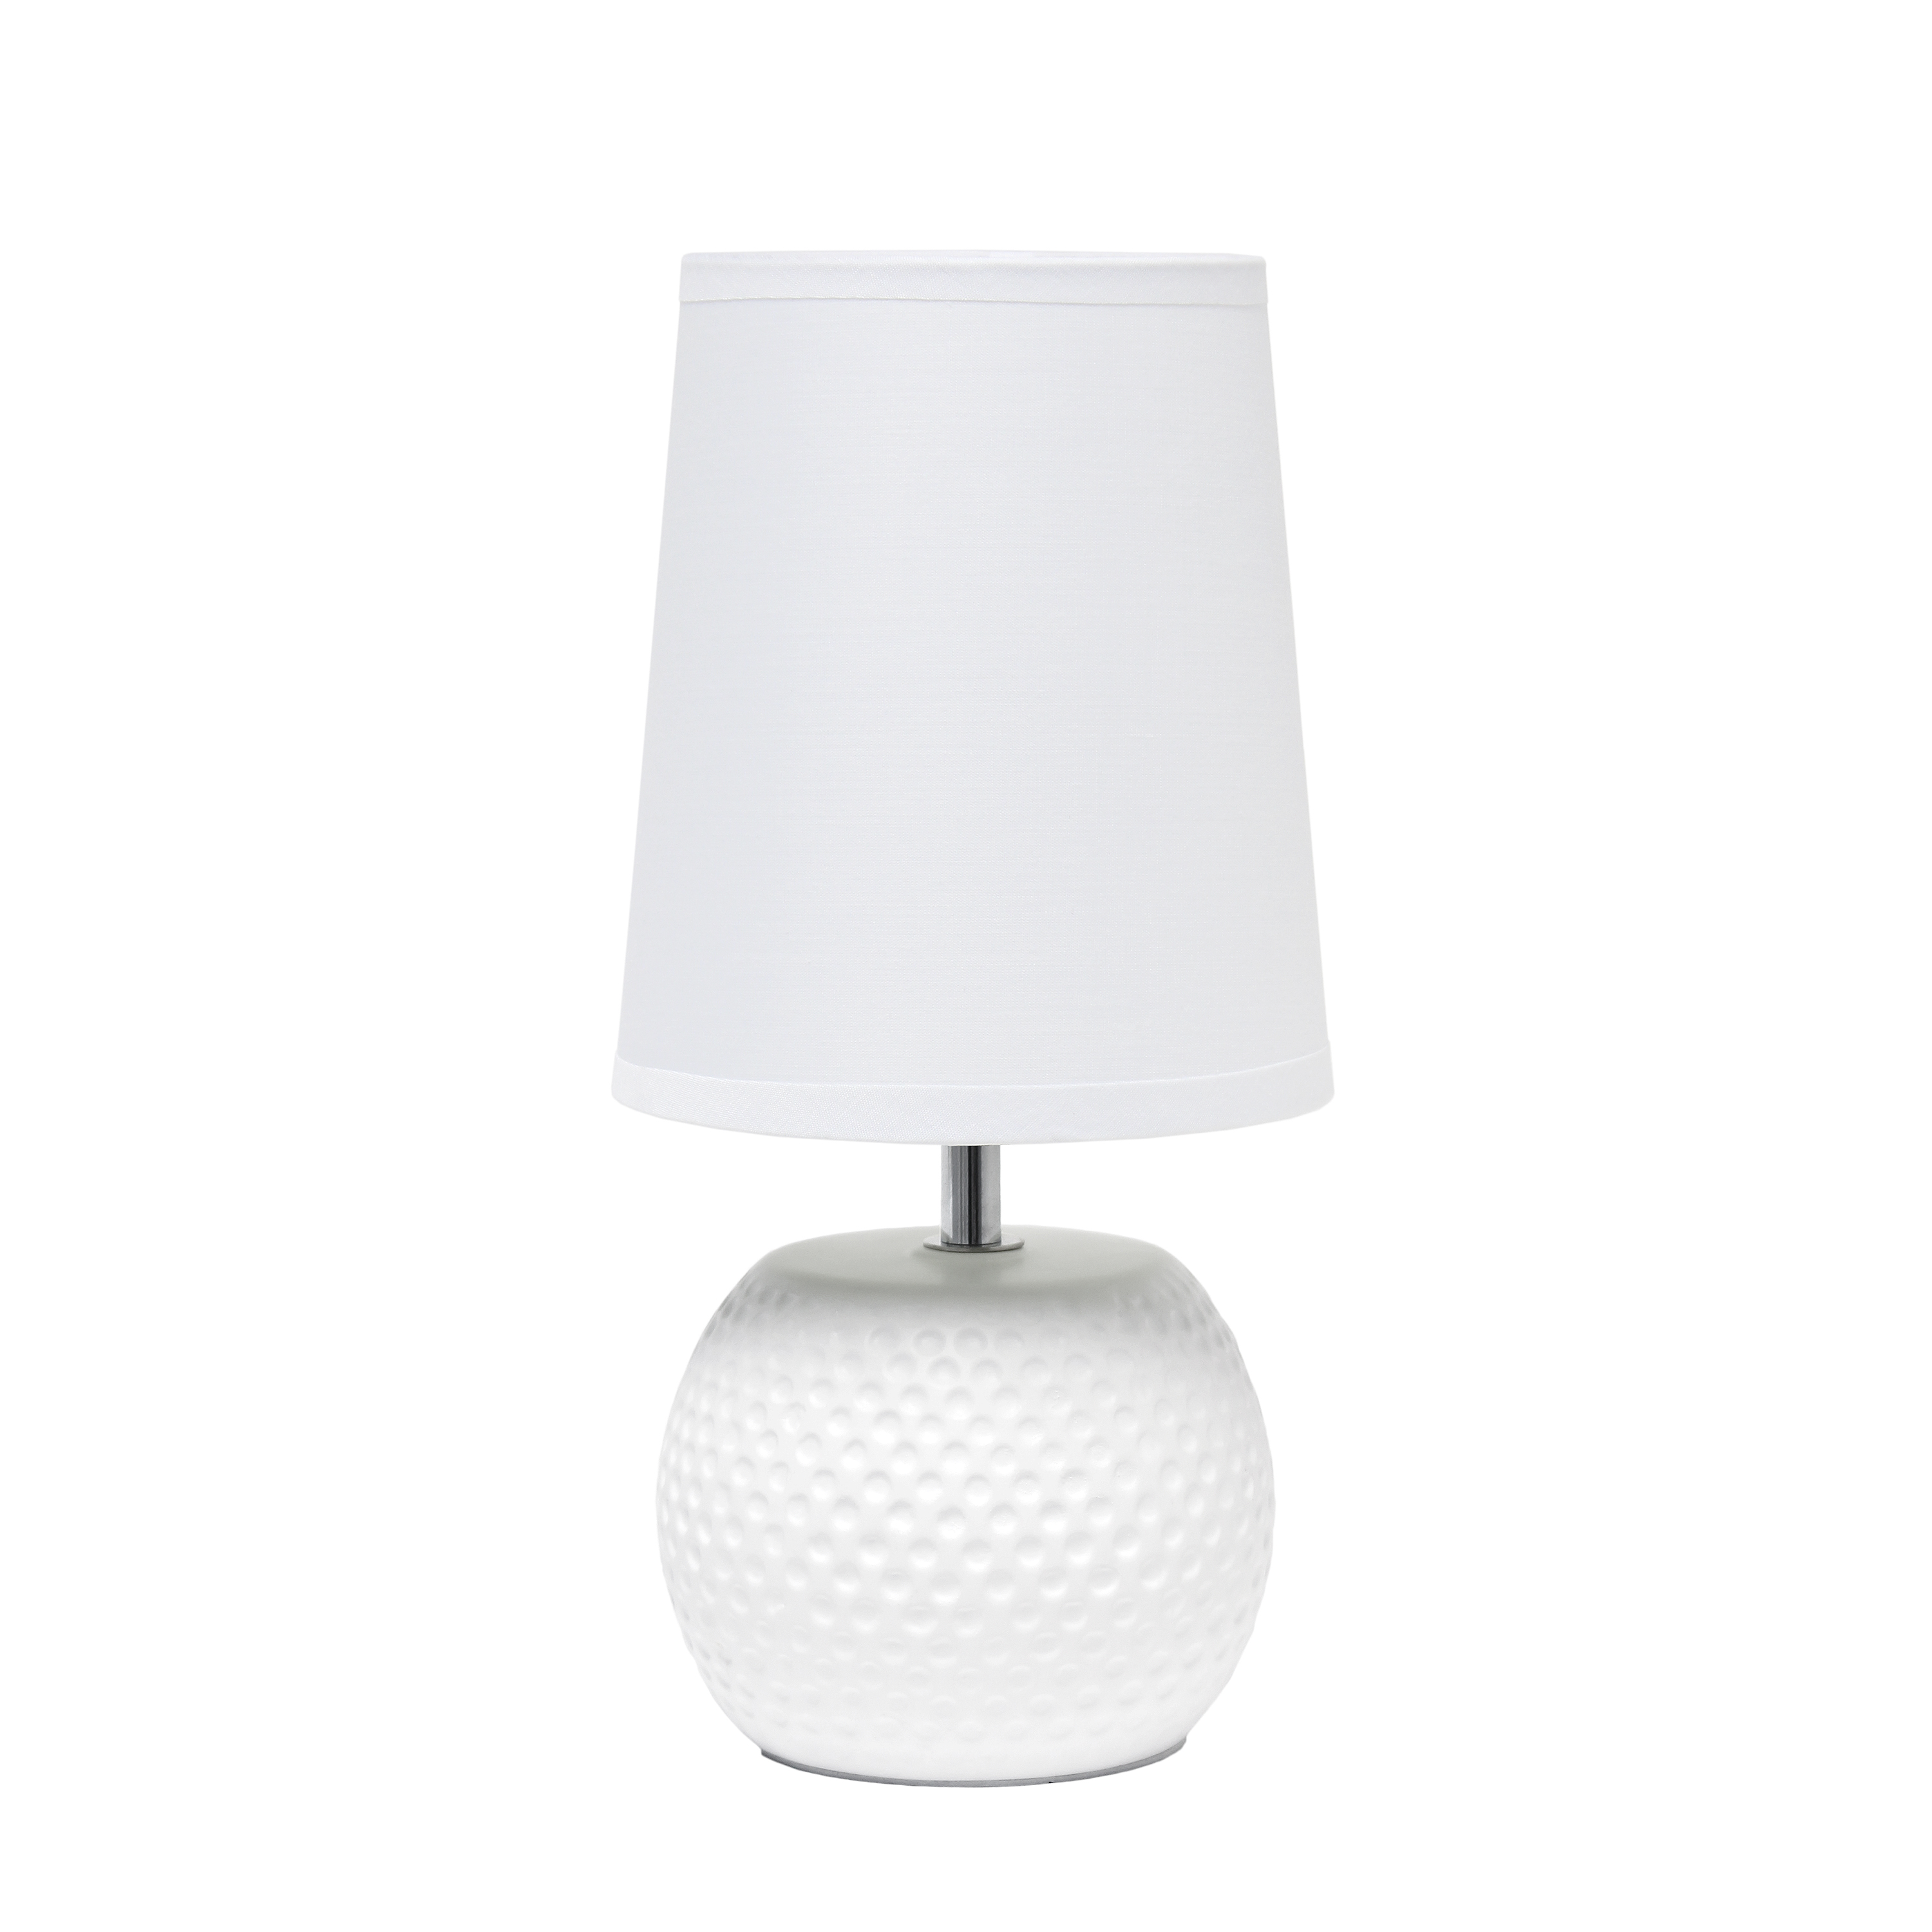 Simple Designs Studded Texture Ceramic Table Lamp, White